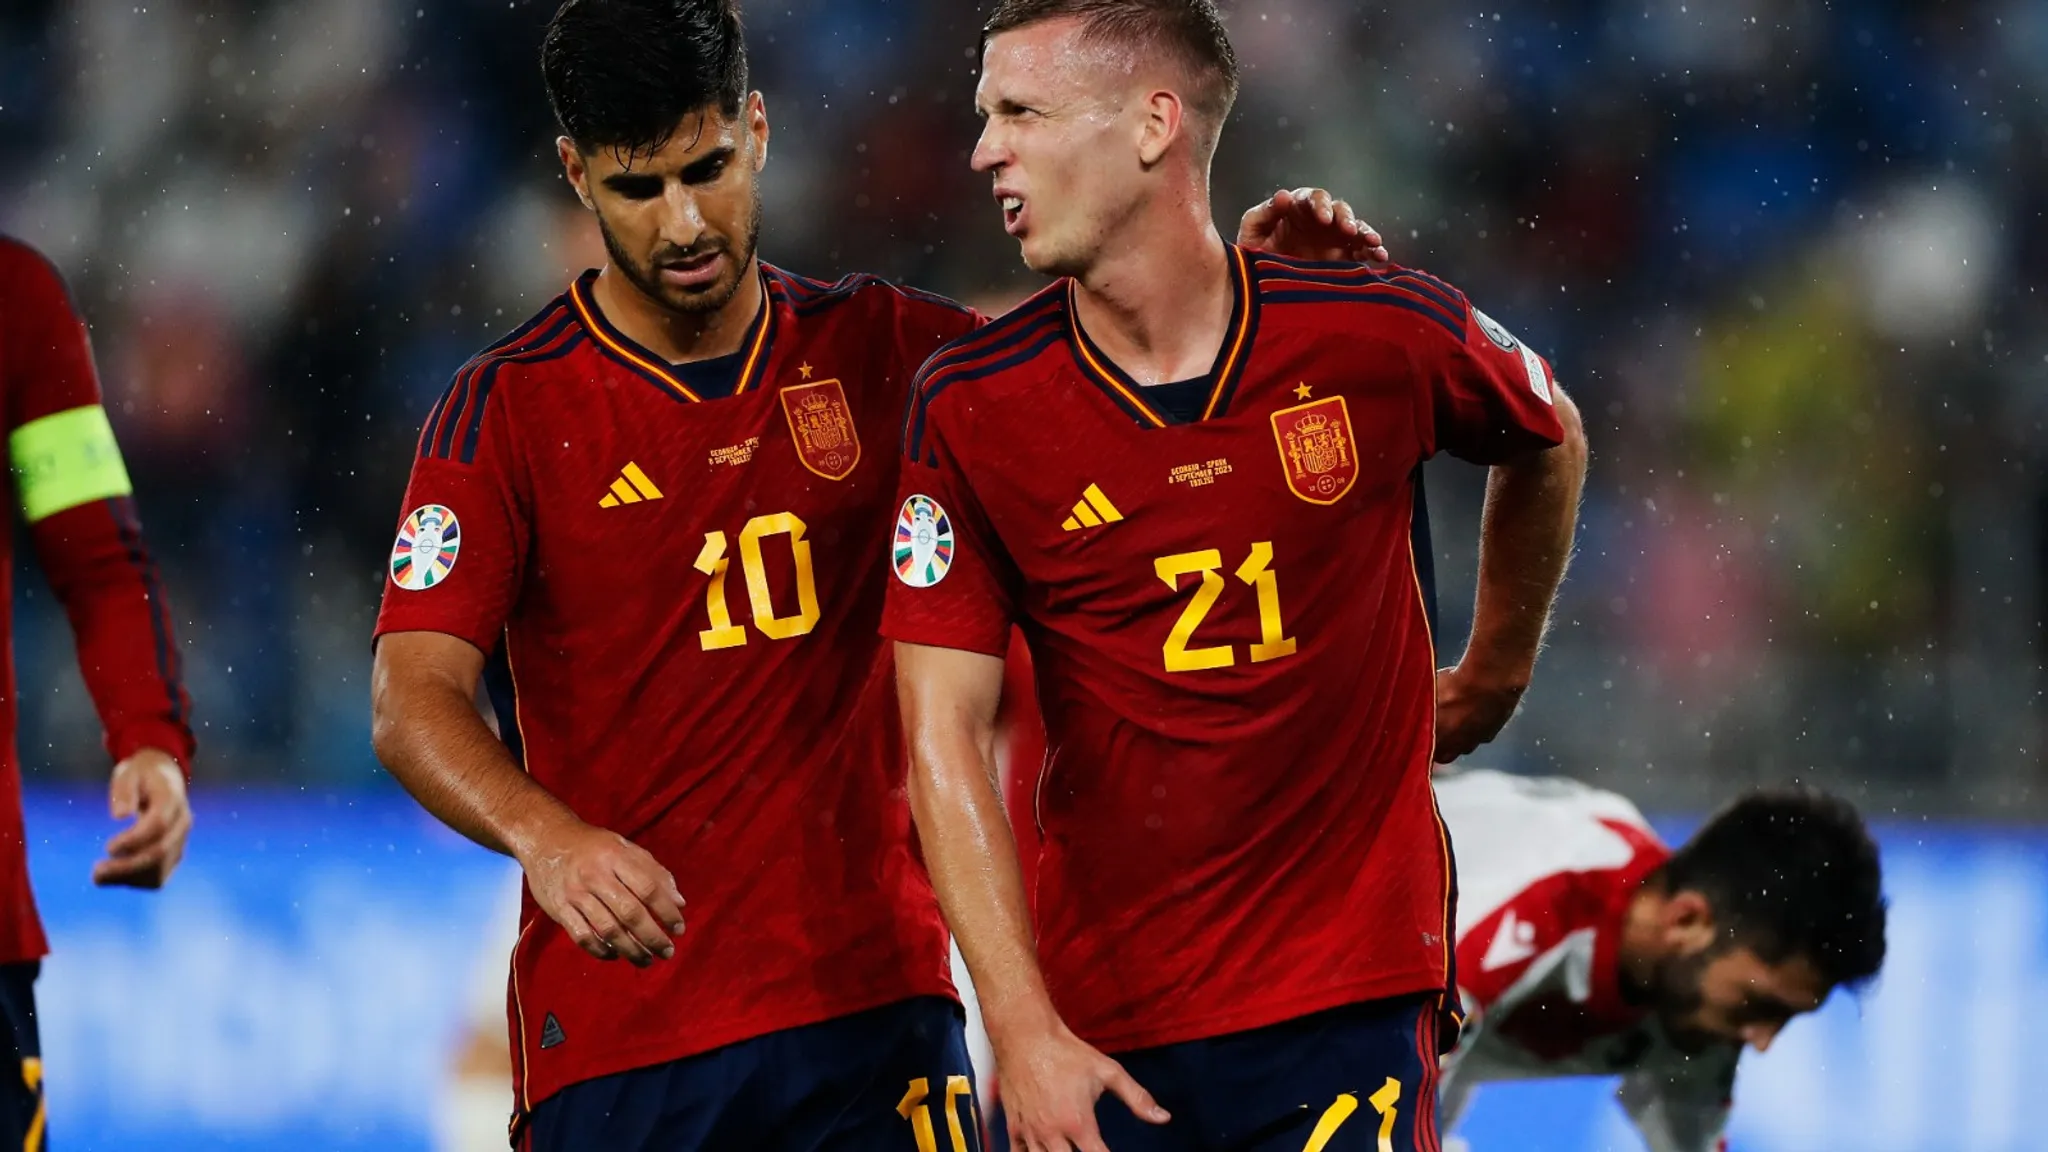 Dani Olmo picked up an injury to his right knee during Spain's game against Georgia.